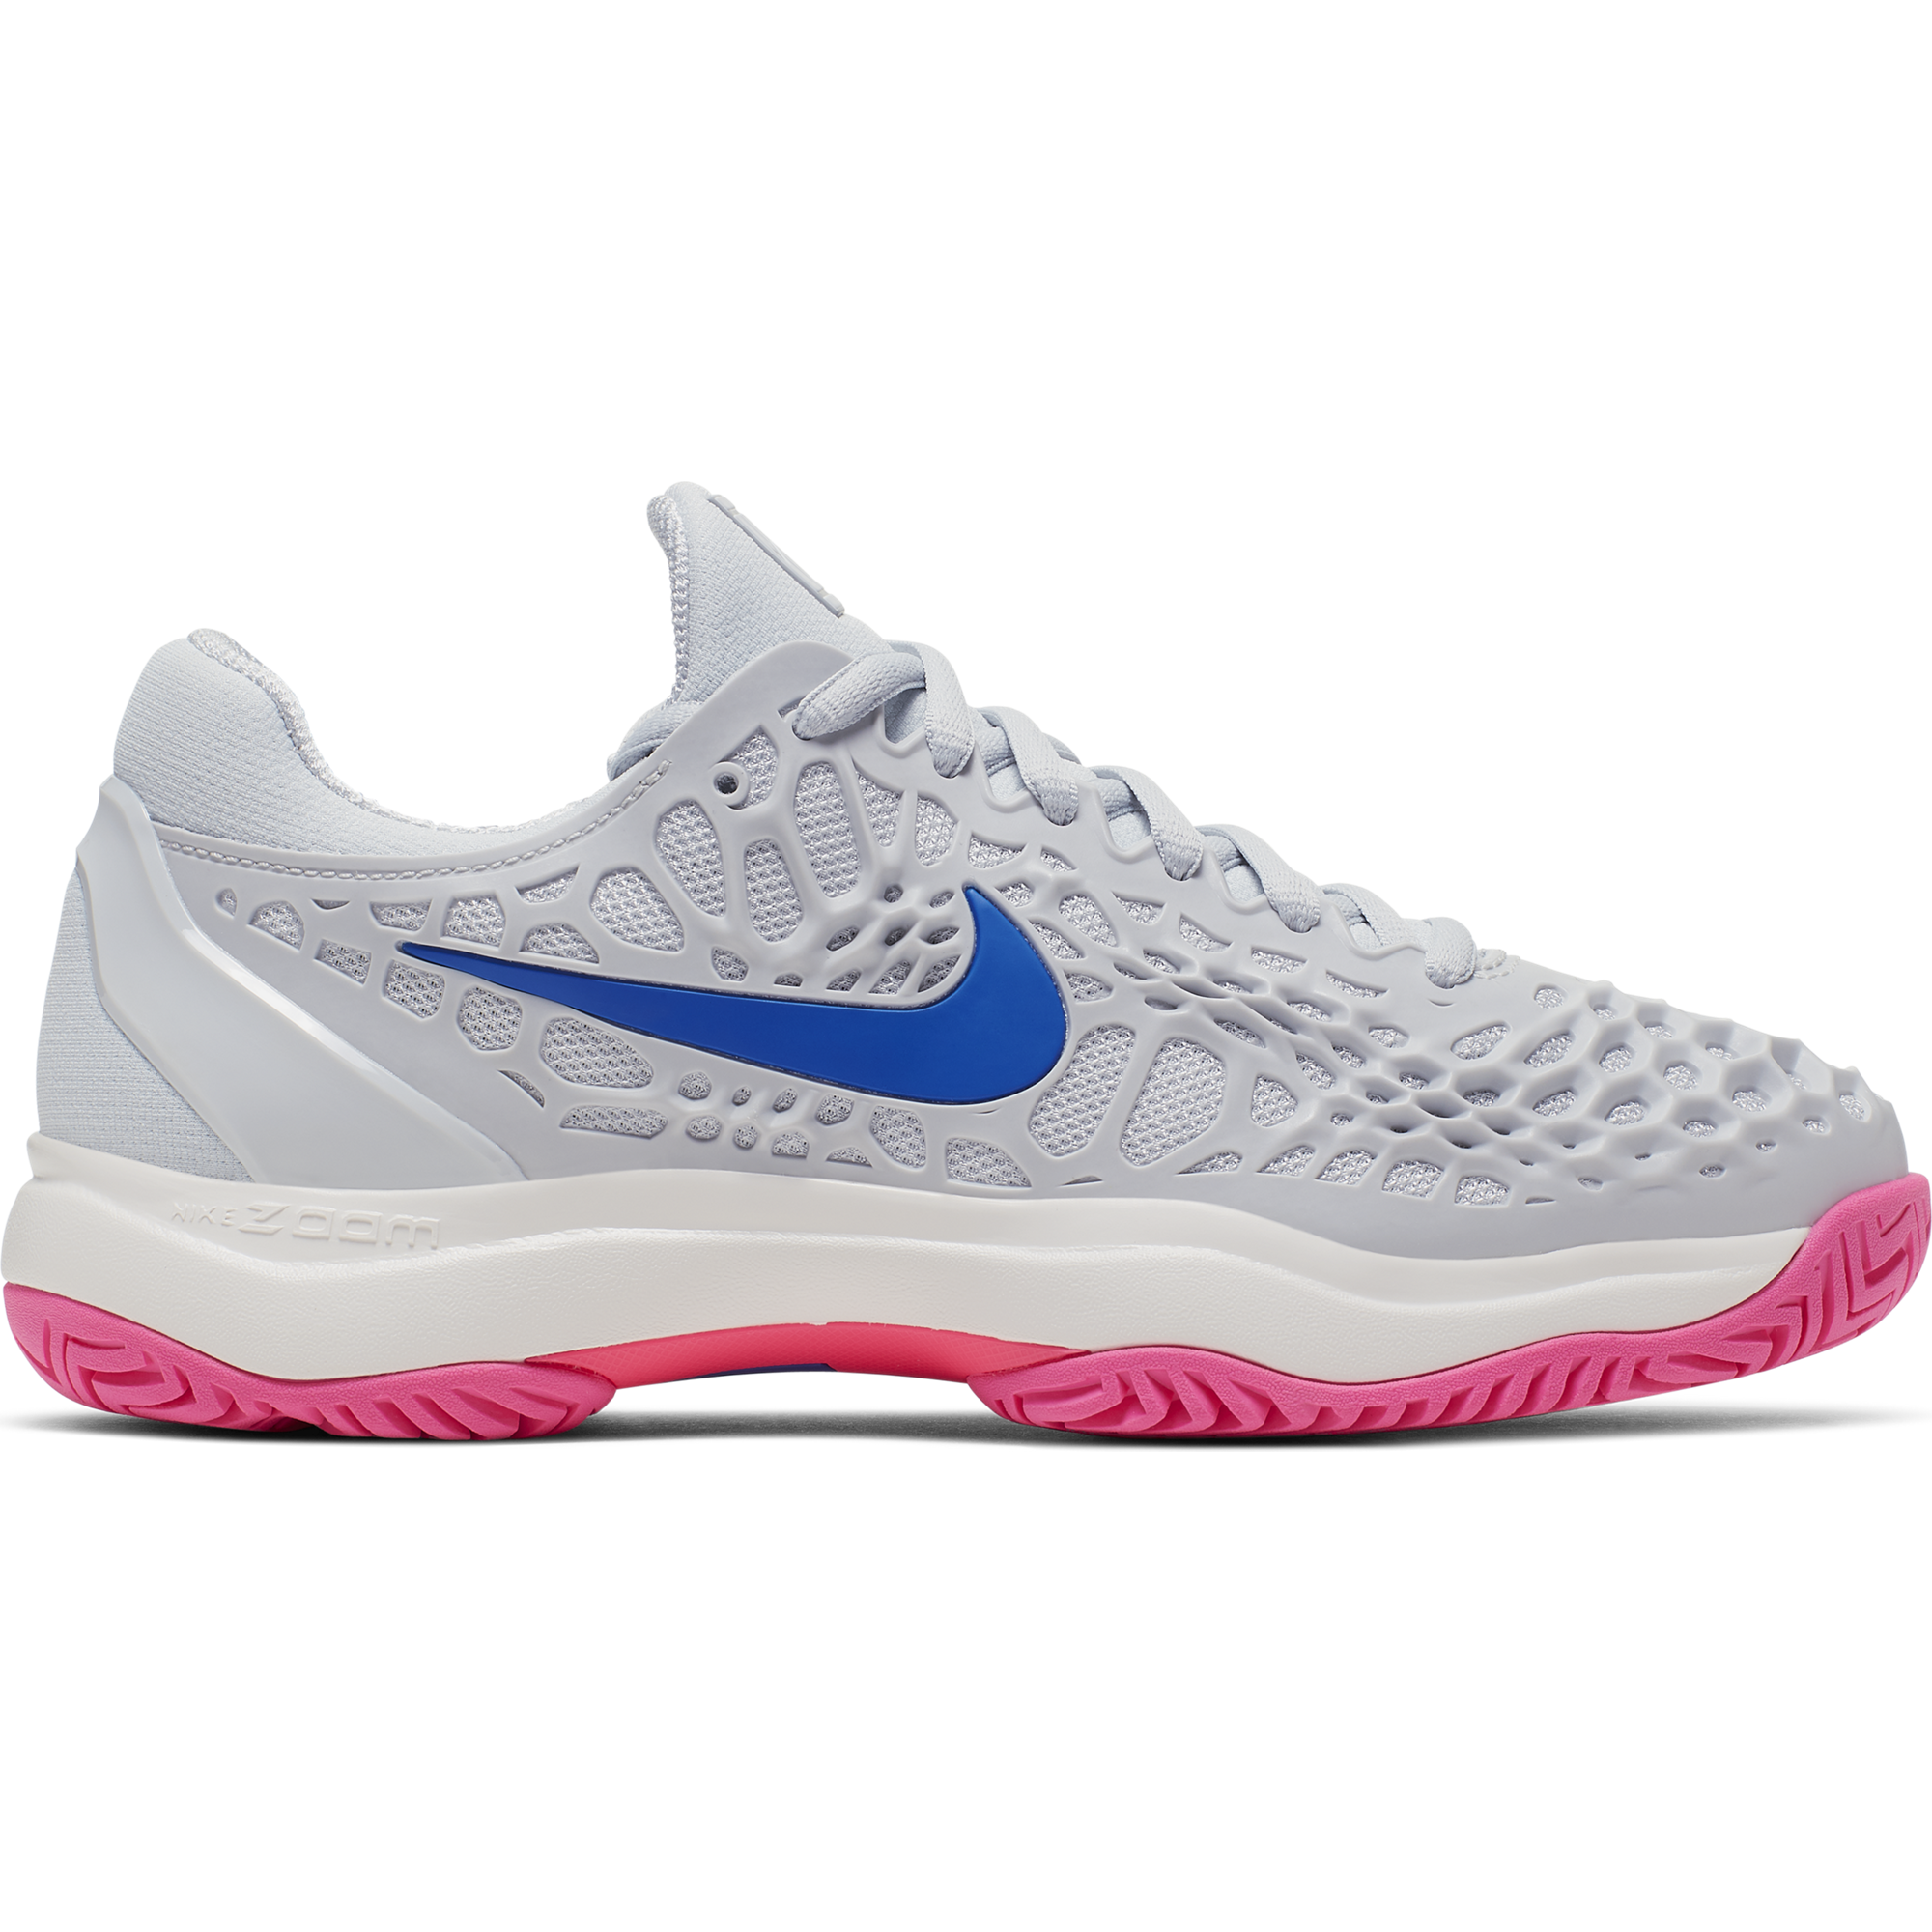 Zoom Cage 3 Tennis - Grey/Pink | PGA TOUR Superstore